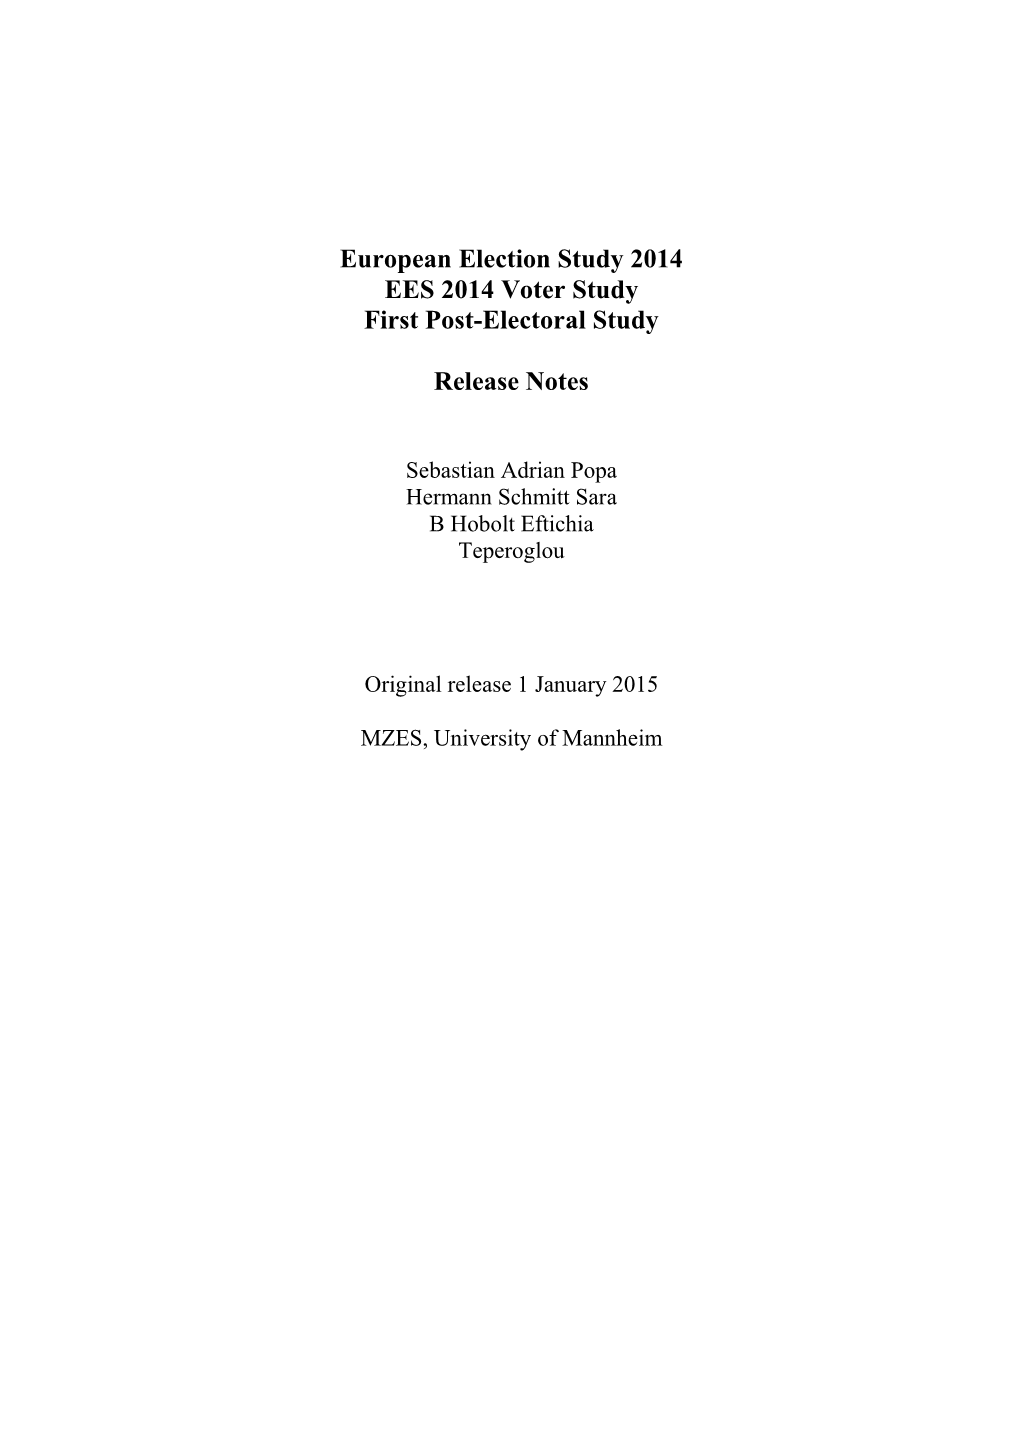 European Election Study 2014 EES 2014 Voter Study First Post-Electoral Study